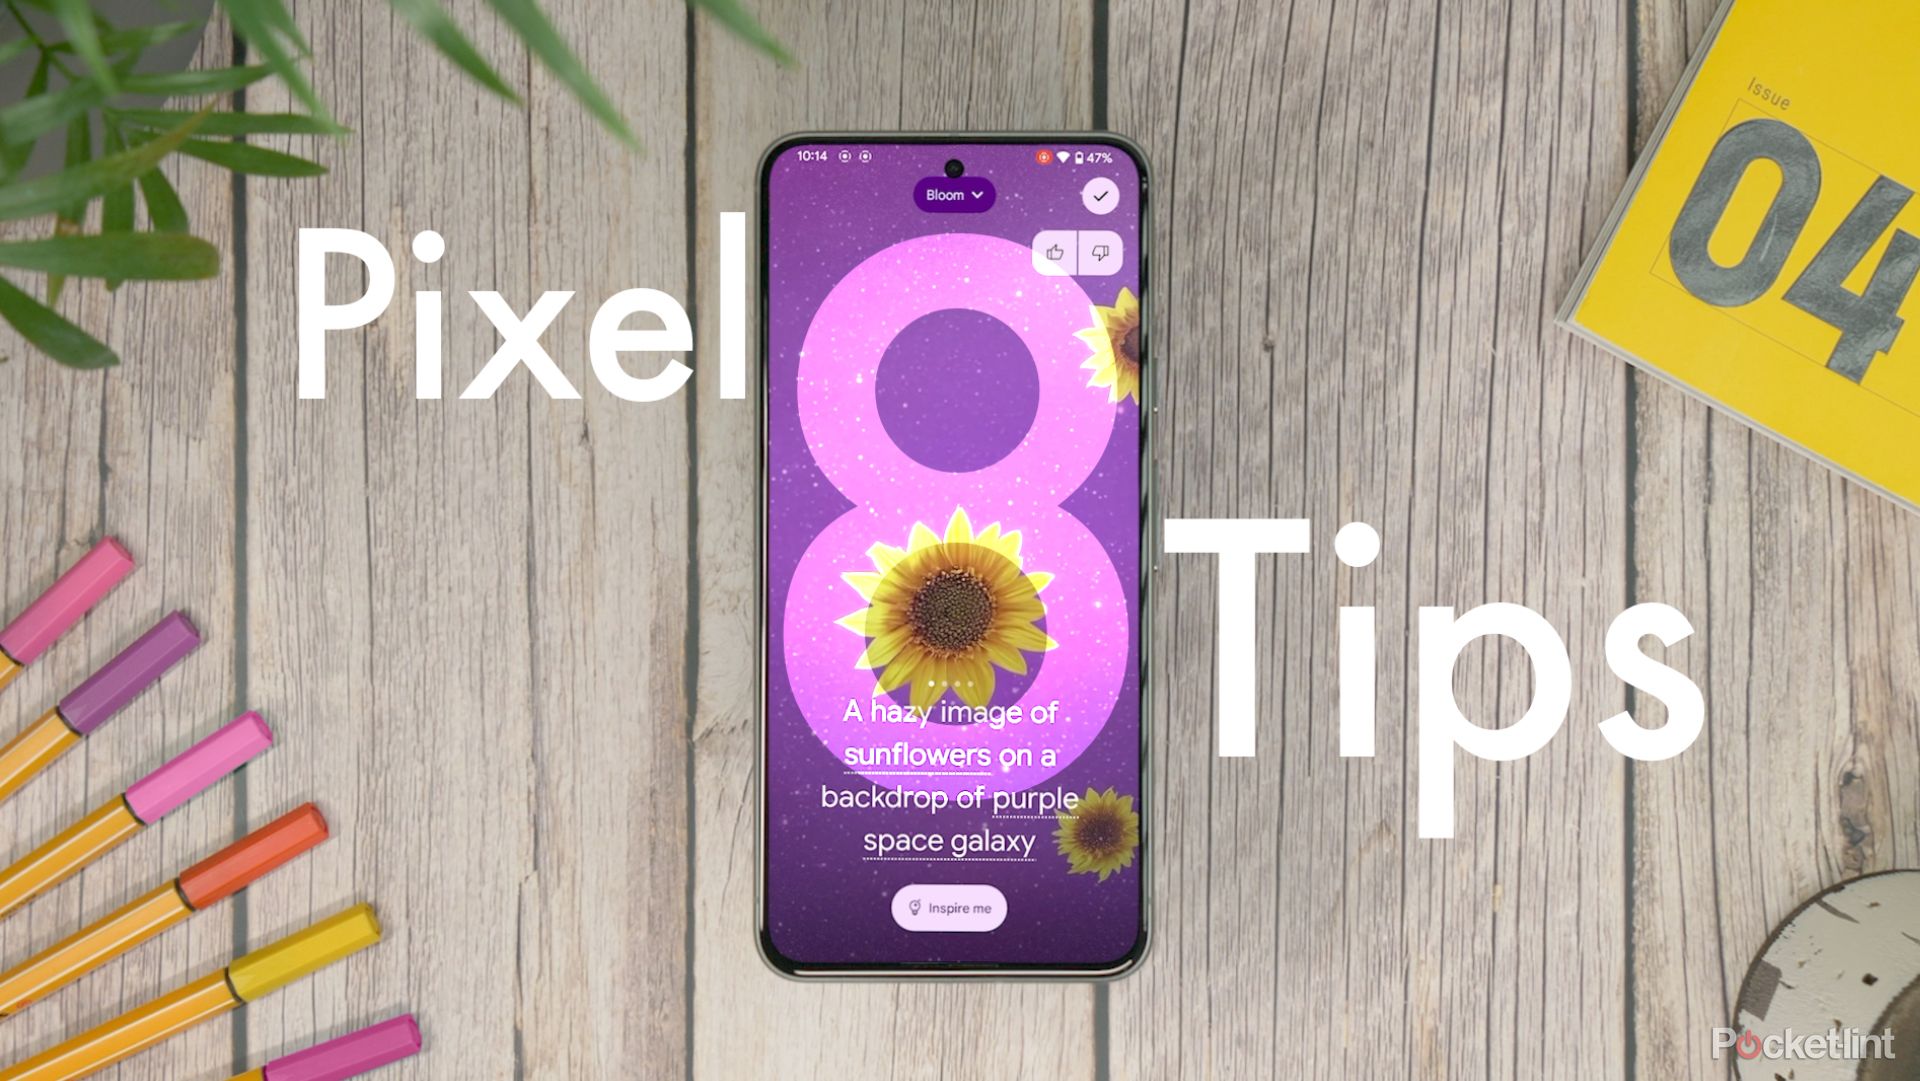 How to Find and Favorite Songs That Now Playing Identified on Your Pixel «  Pixel :: Gadget Hacks